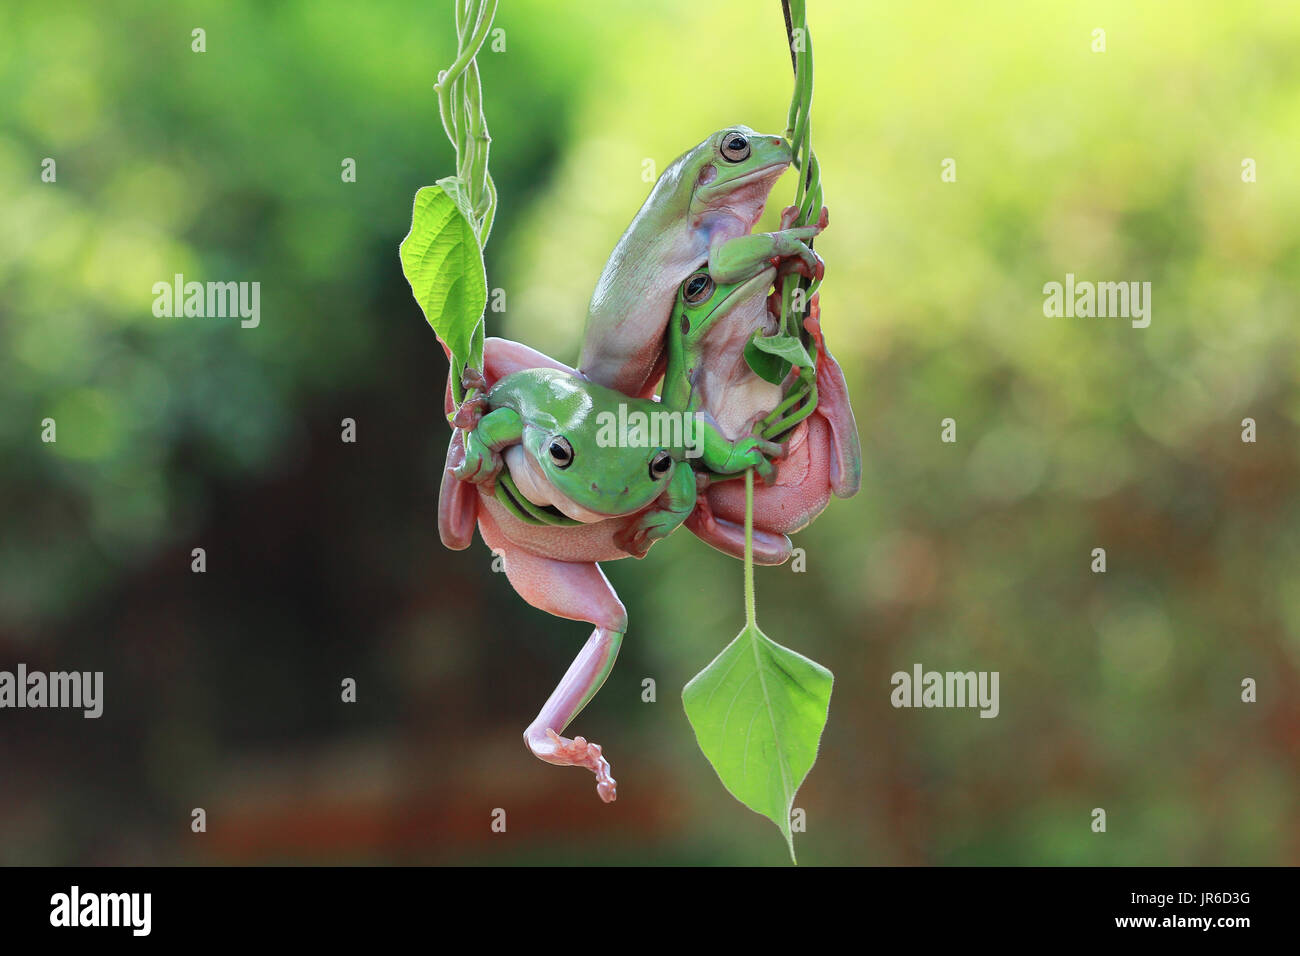 Three Dumpy frogs on a plant, Indonesia Stock Photo